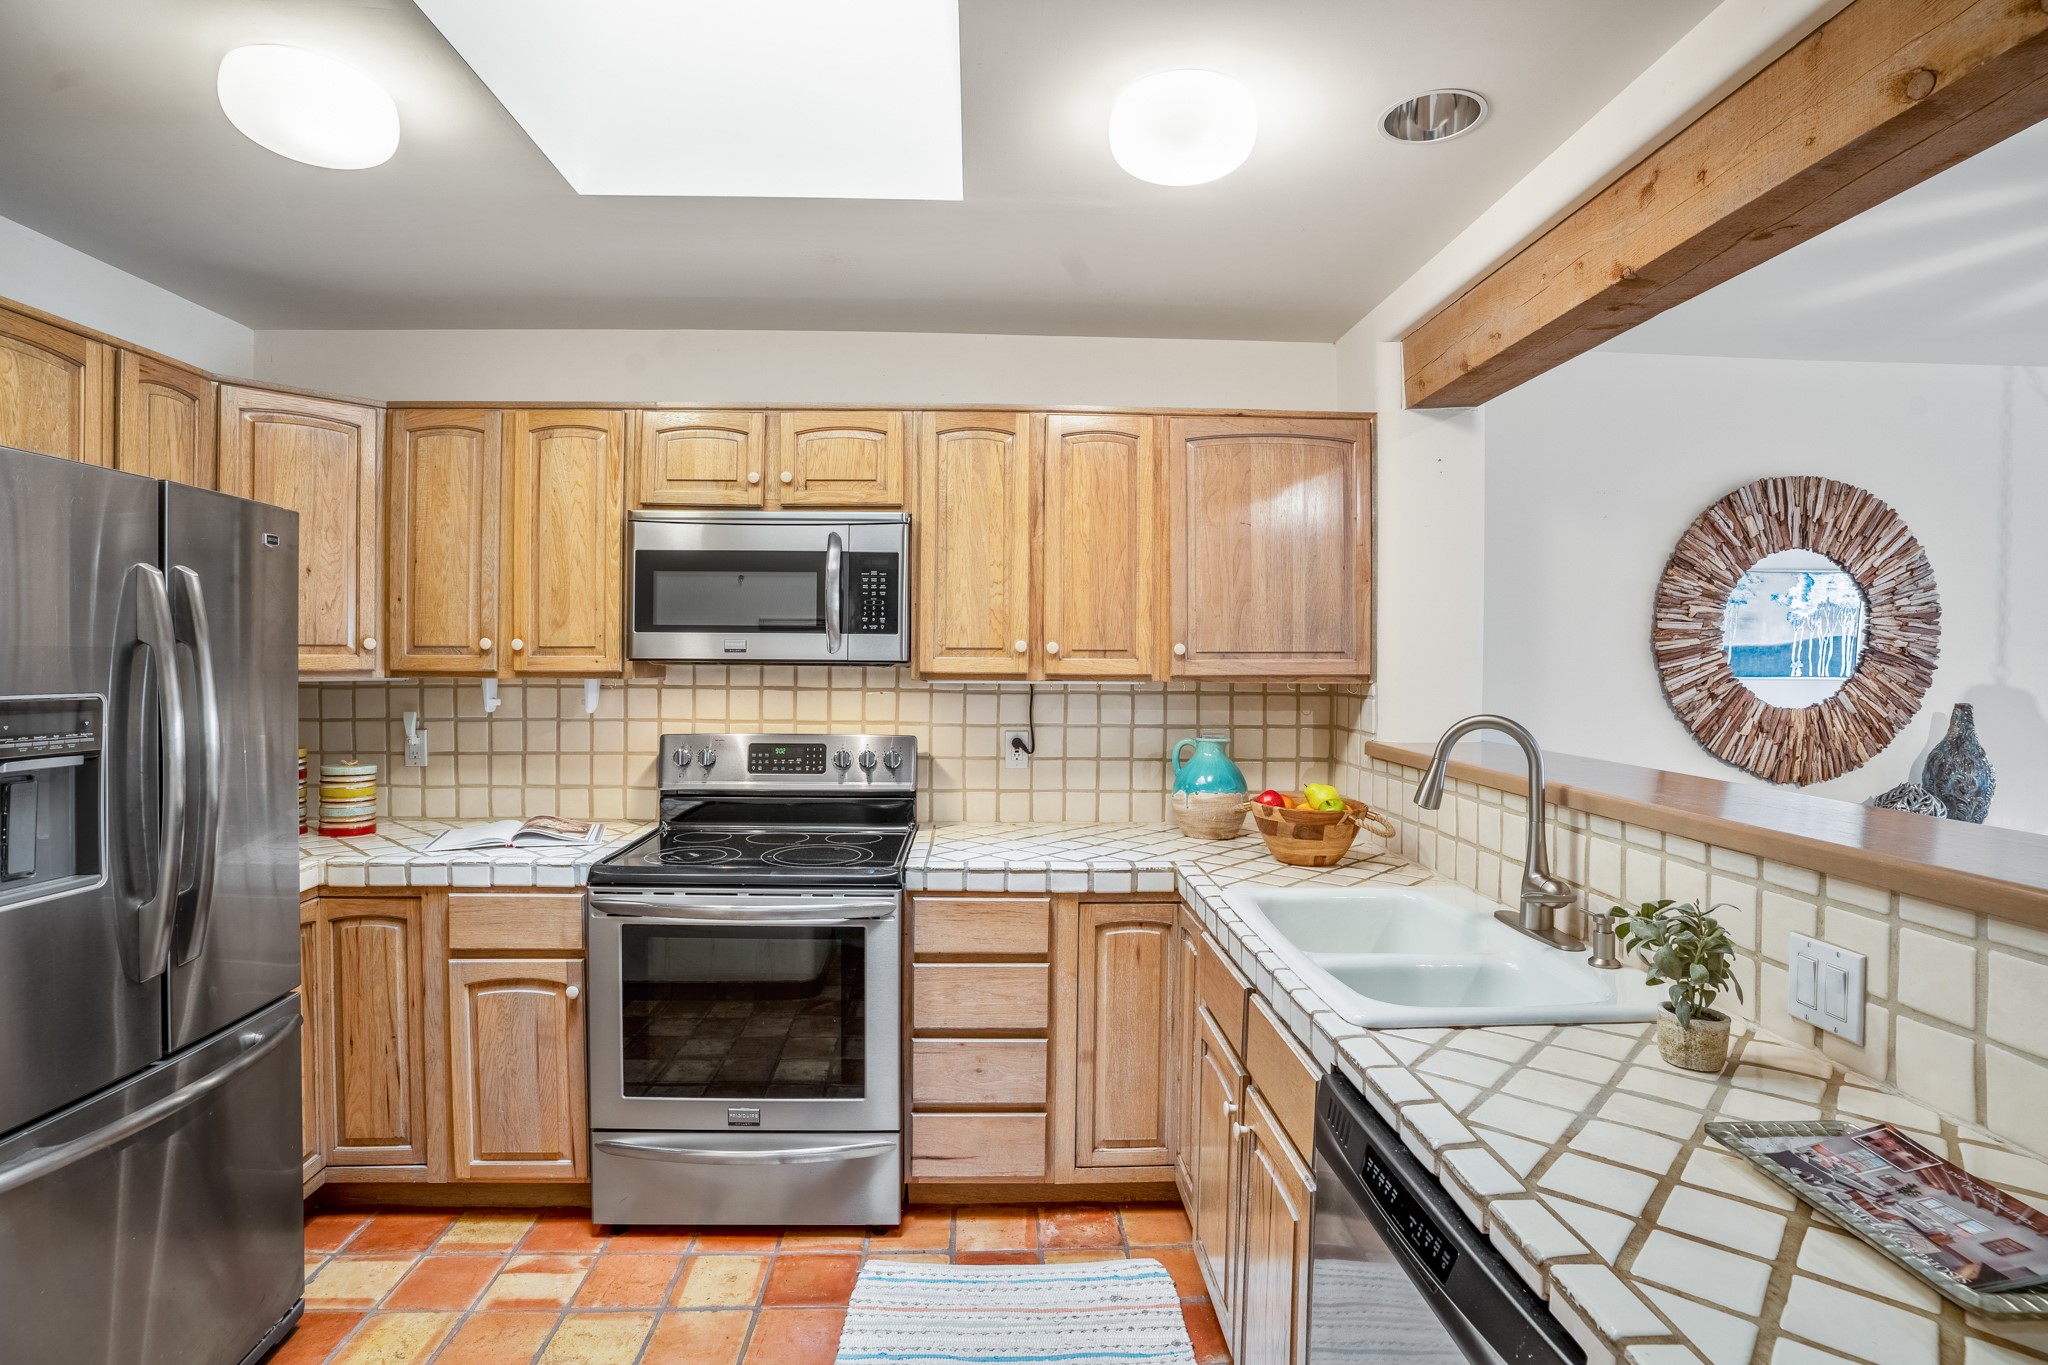 3101 Old Pecos Trail 302, Santa Fe, New Mexico 87505, 2 Bedrooms Bedrooms, ,2 BathroomsBathrooms,Residential,For Sale,3101 Old Pecos Trail 302,202337665